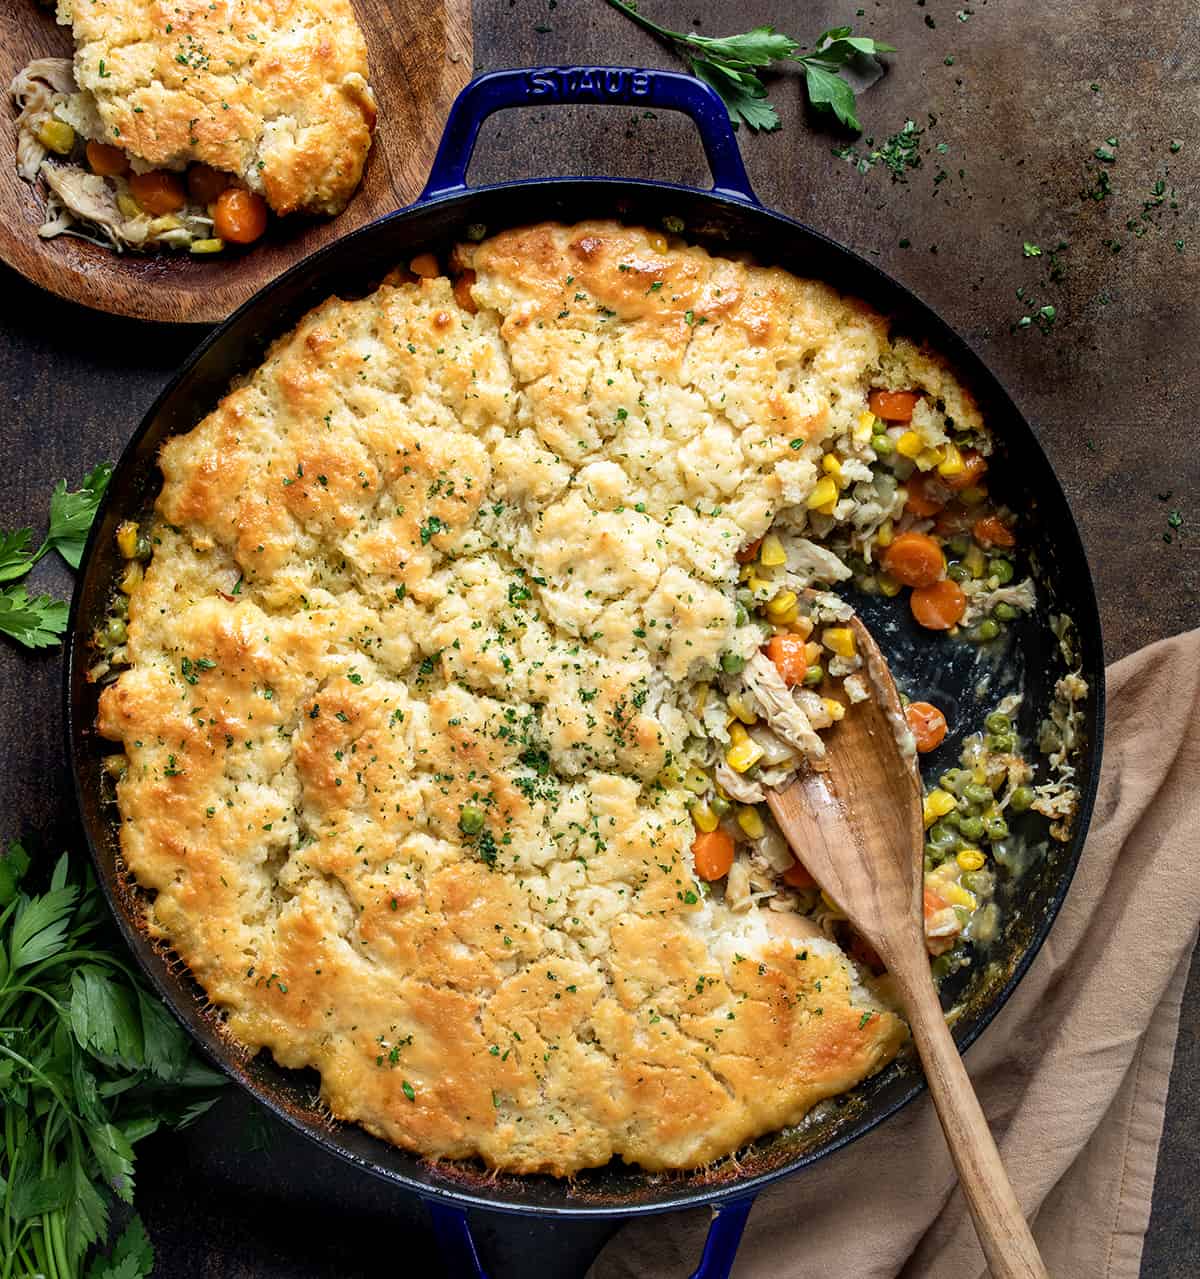 Skillet of Butter Swim Biscuit Chicken Pot Pie with Some Removed and a Wooden Spoon.